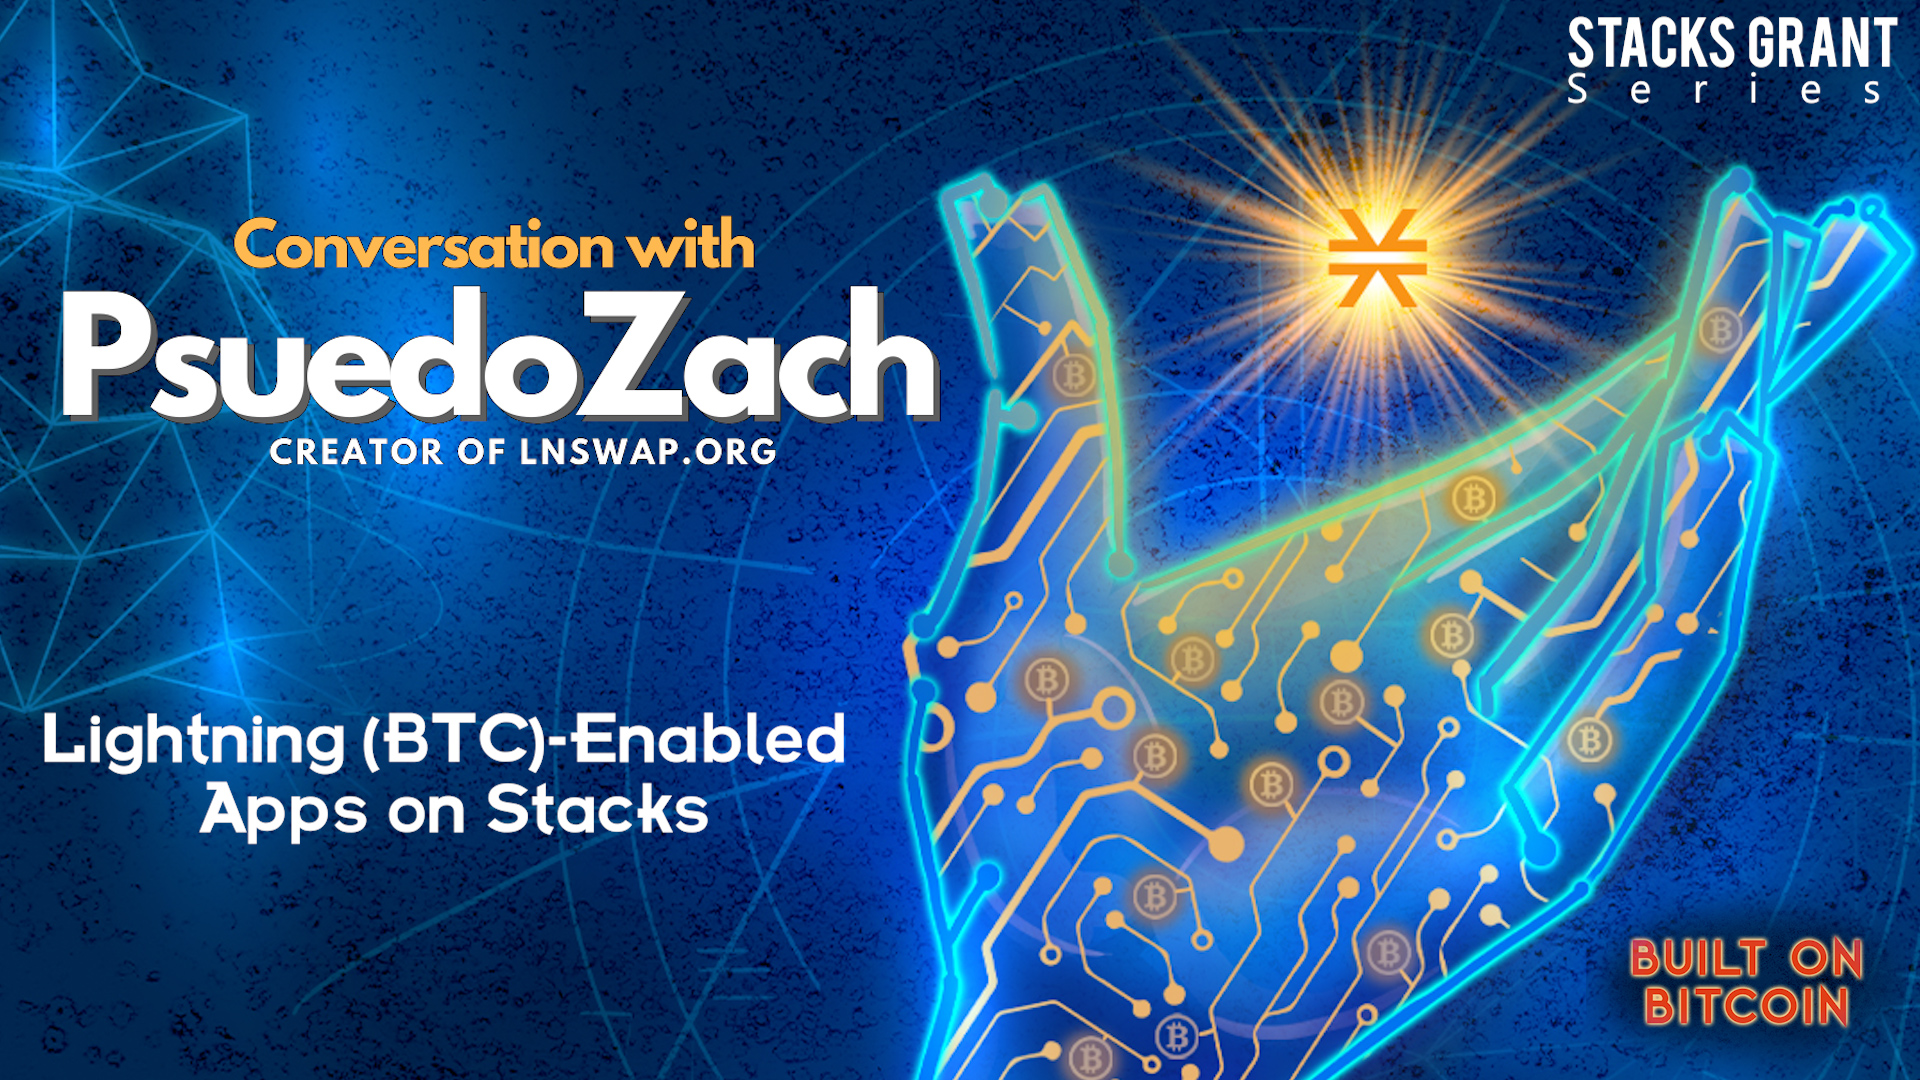 E33: Lightning-Enabled Apps on Stacks with LNSwap Creator - PseudoZach - Stacks Grant Series